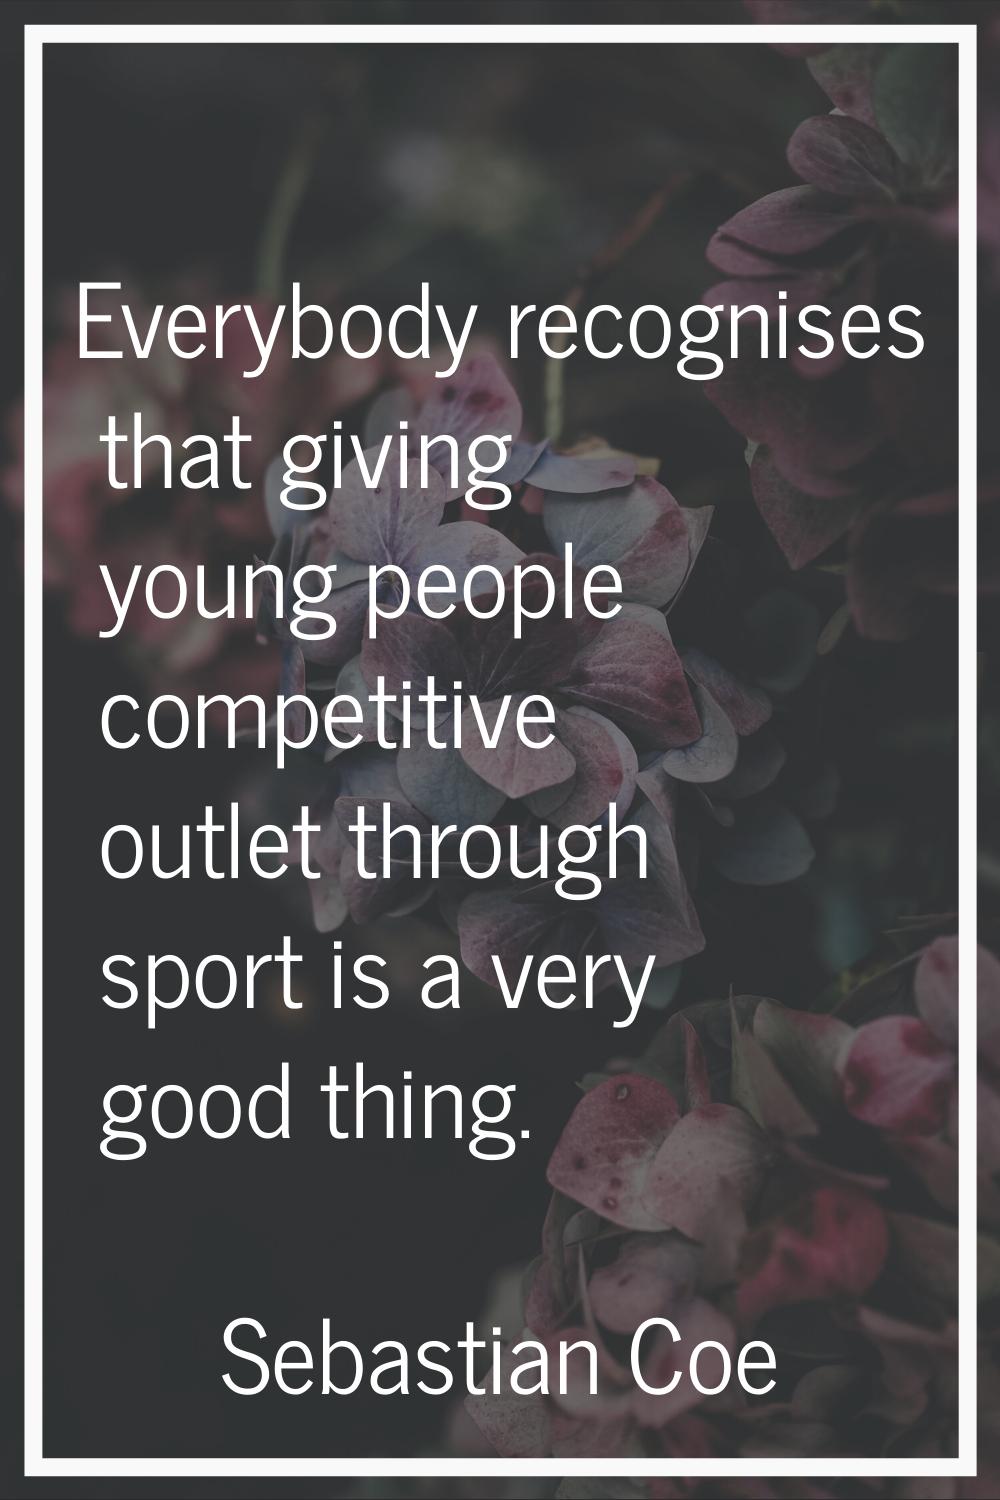 Everybody recognises that giving young people competitive outlet through sport is a very good thing